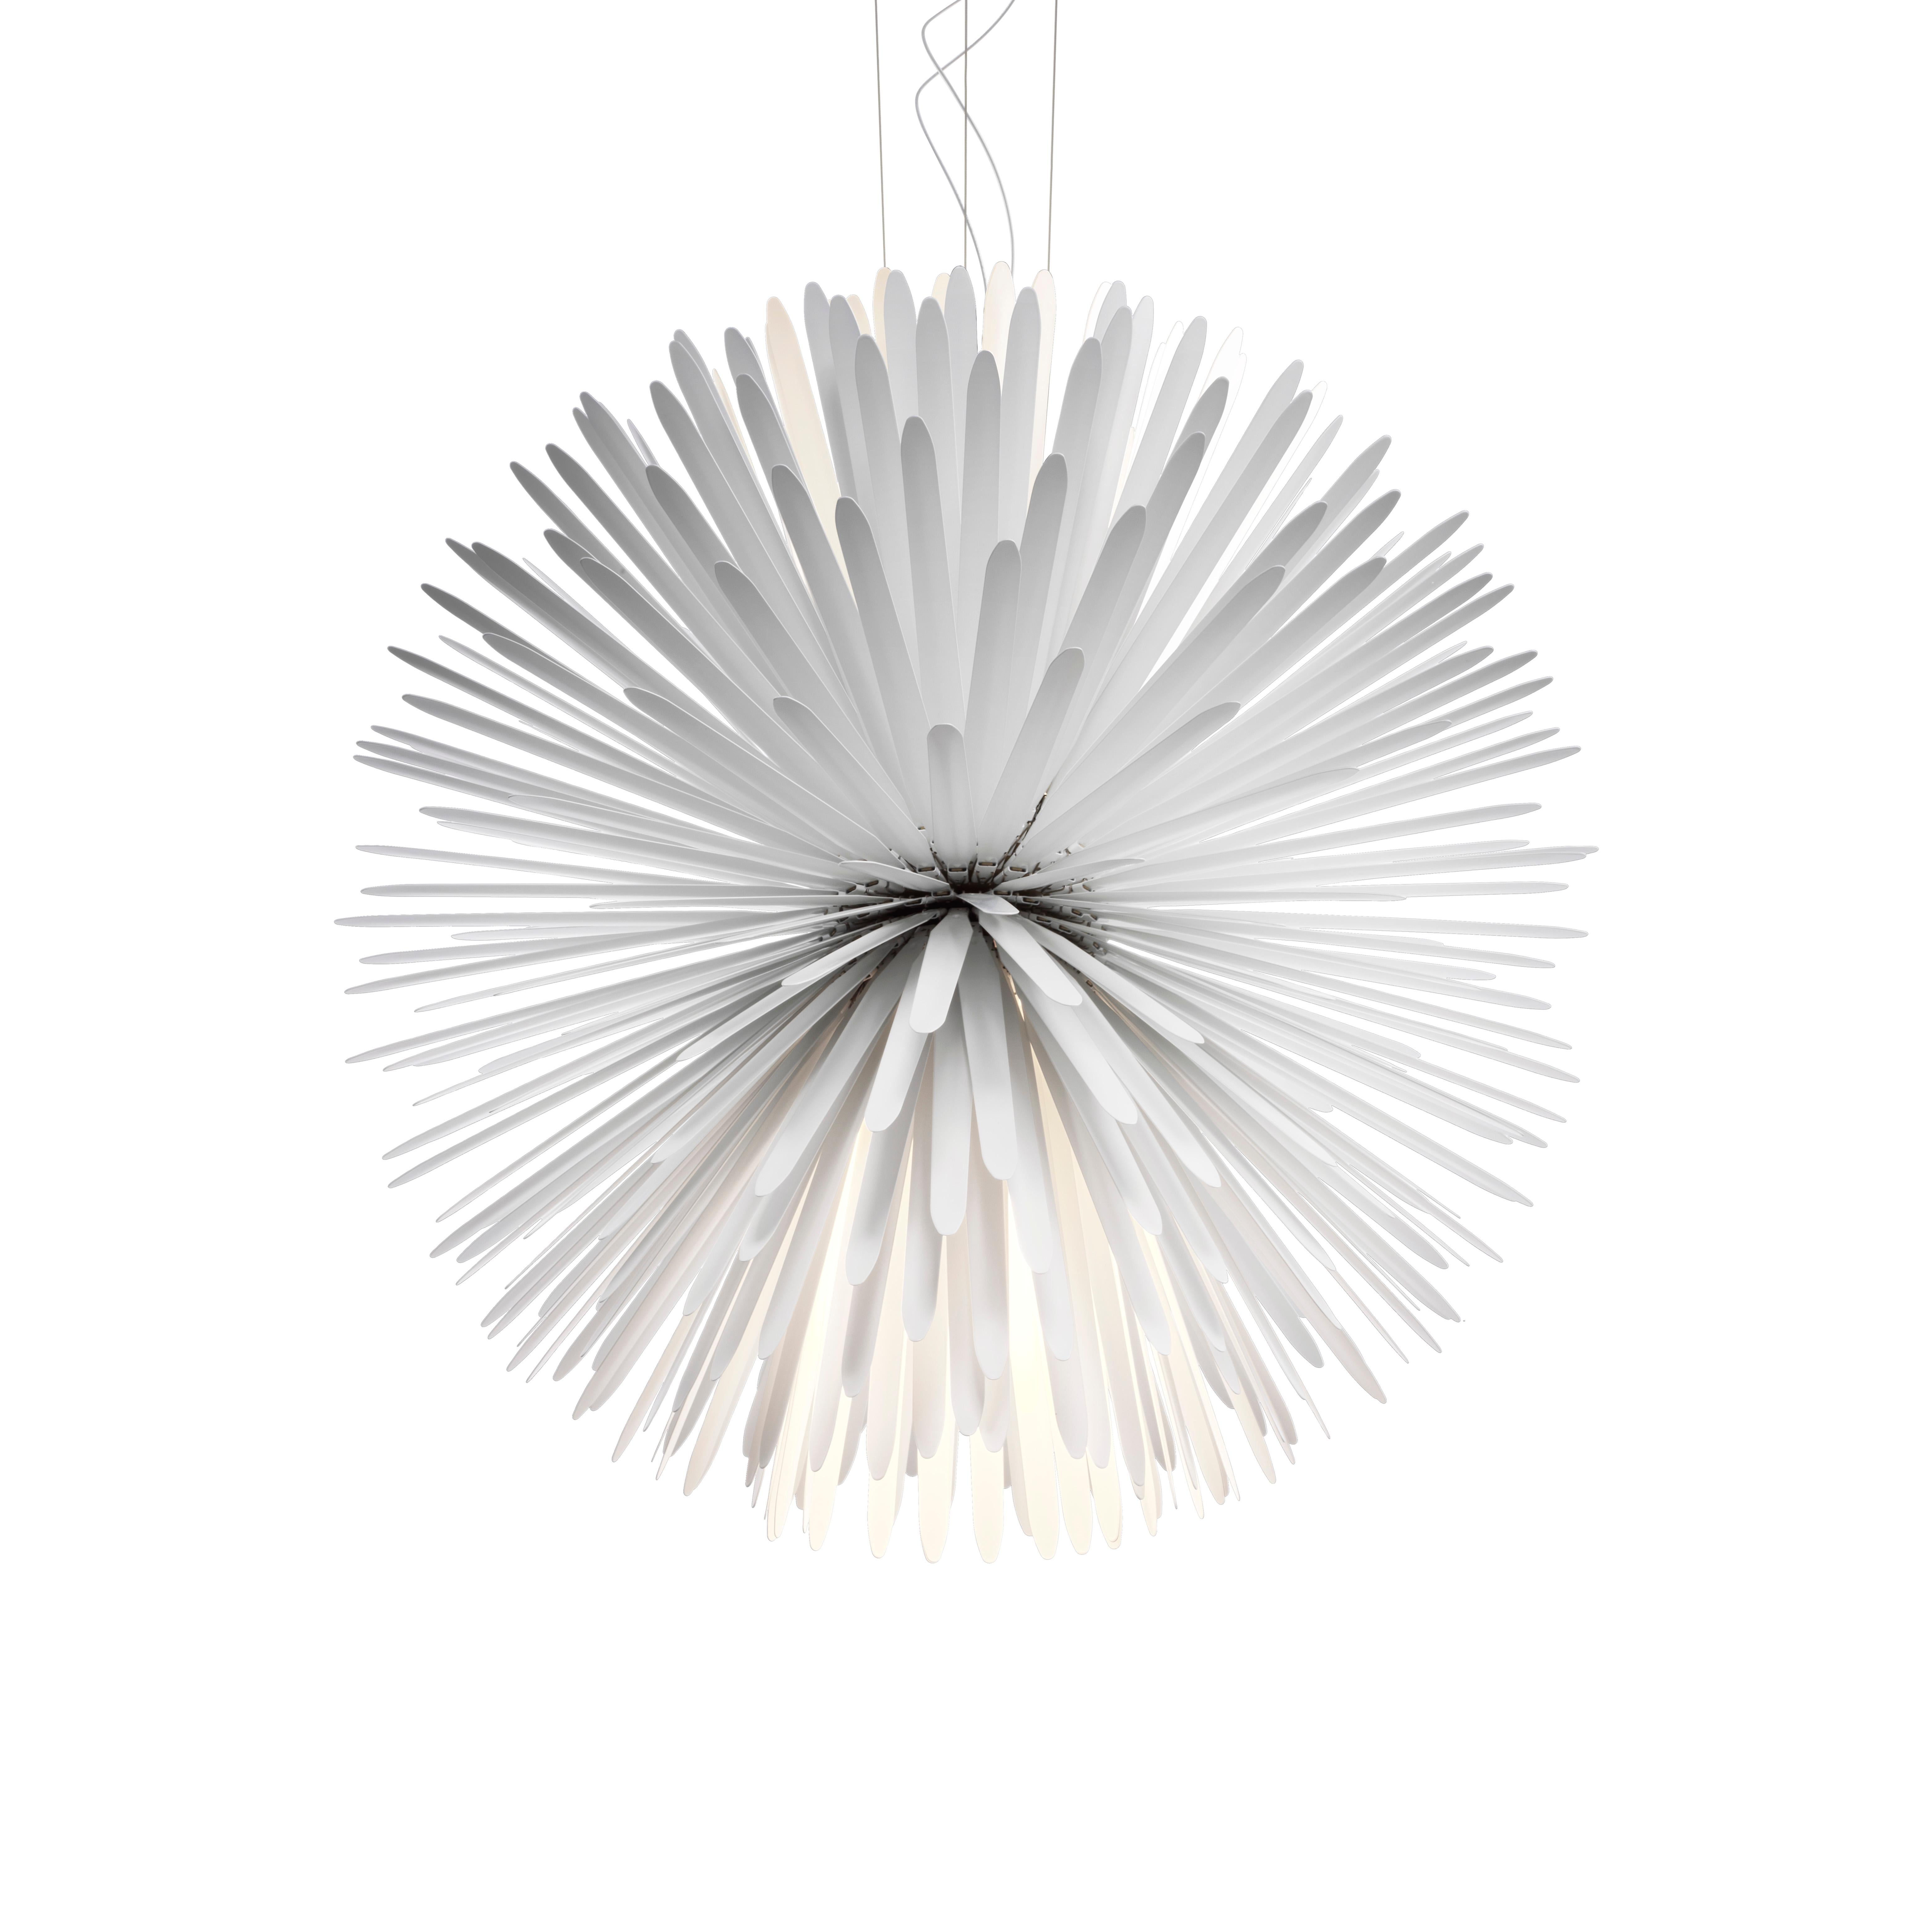 As many as 390 steel rays, separated from each other and grafted onto the central body, give life to an extremely scenographic suspension lamp with great presence and personality.
 
To design Sun-Light of Love Tord Boontje was inspired by the